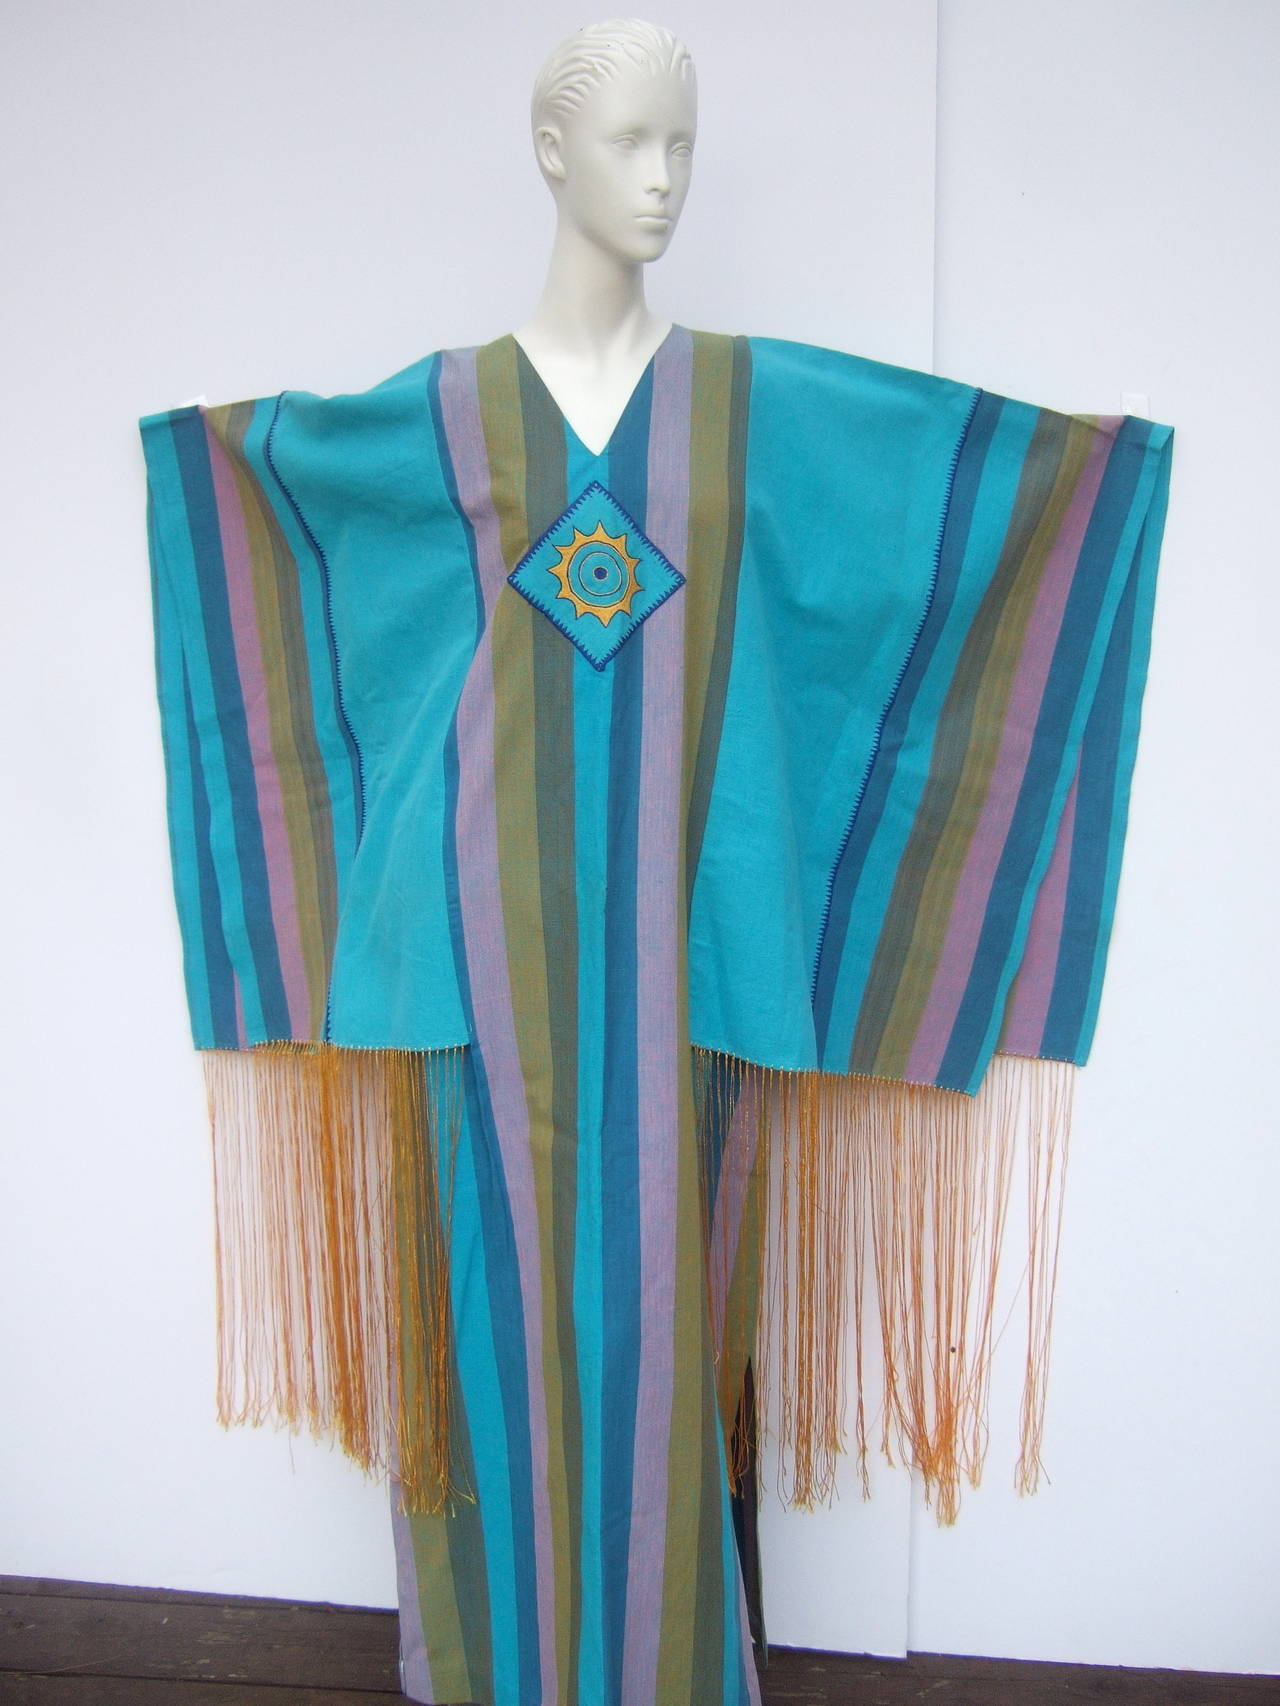 1970s Spectacular angel wing caftan designed by Joesfa
The exotic cotton caftan is a myriad of soft muted colors;
Aqua blue, lavender, mauve, olive green, brown vertical stripes

The center of the caftan is designed with an applique